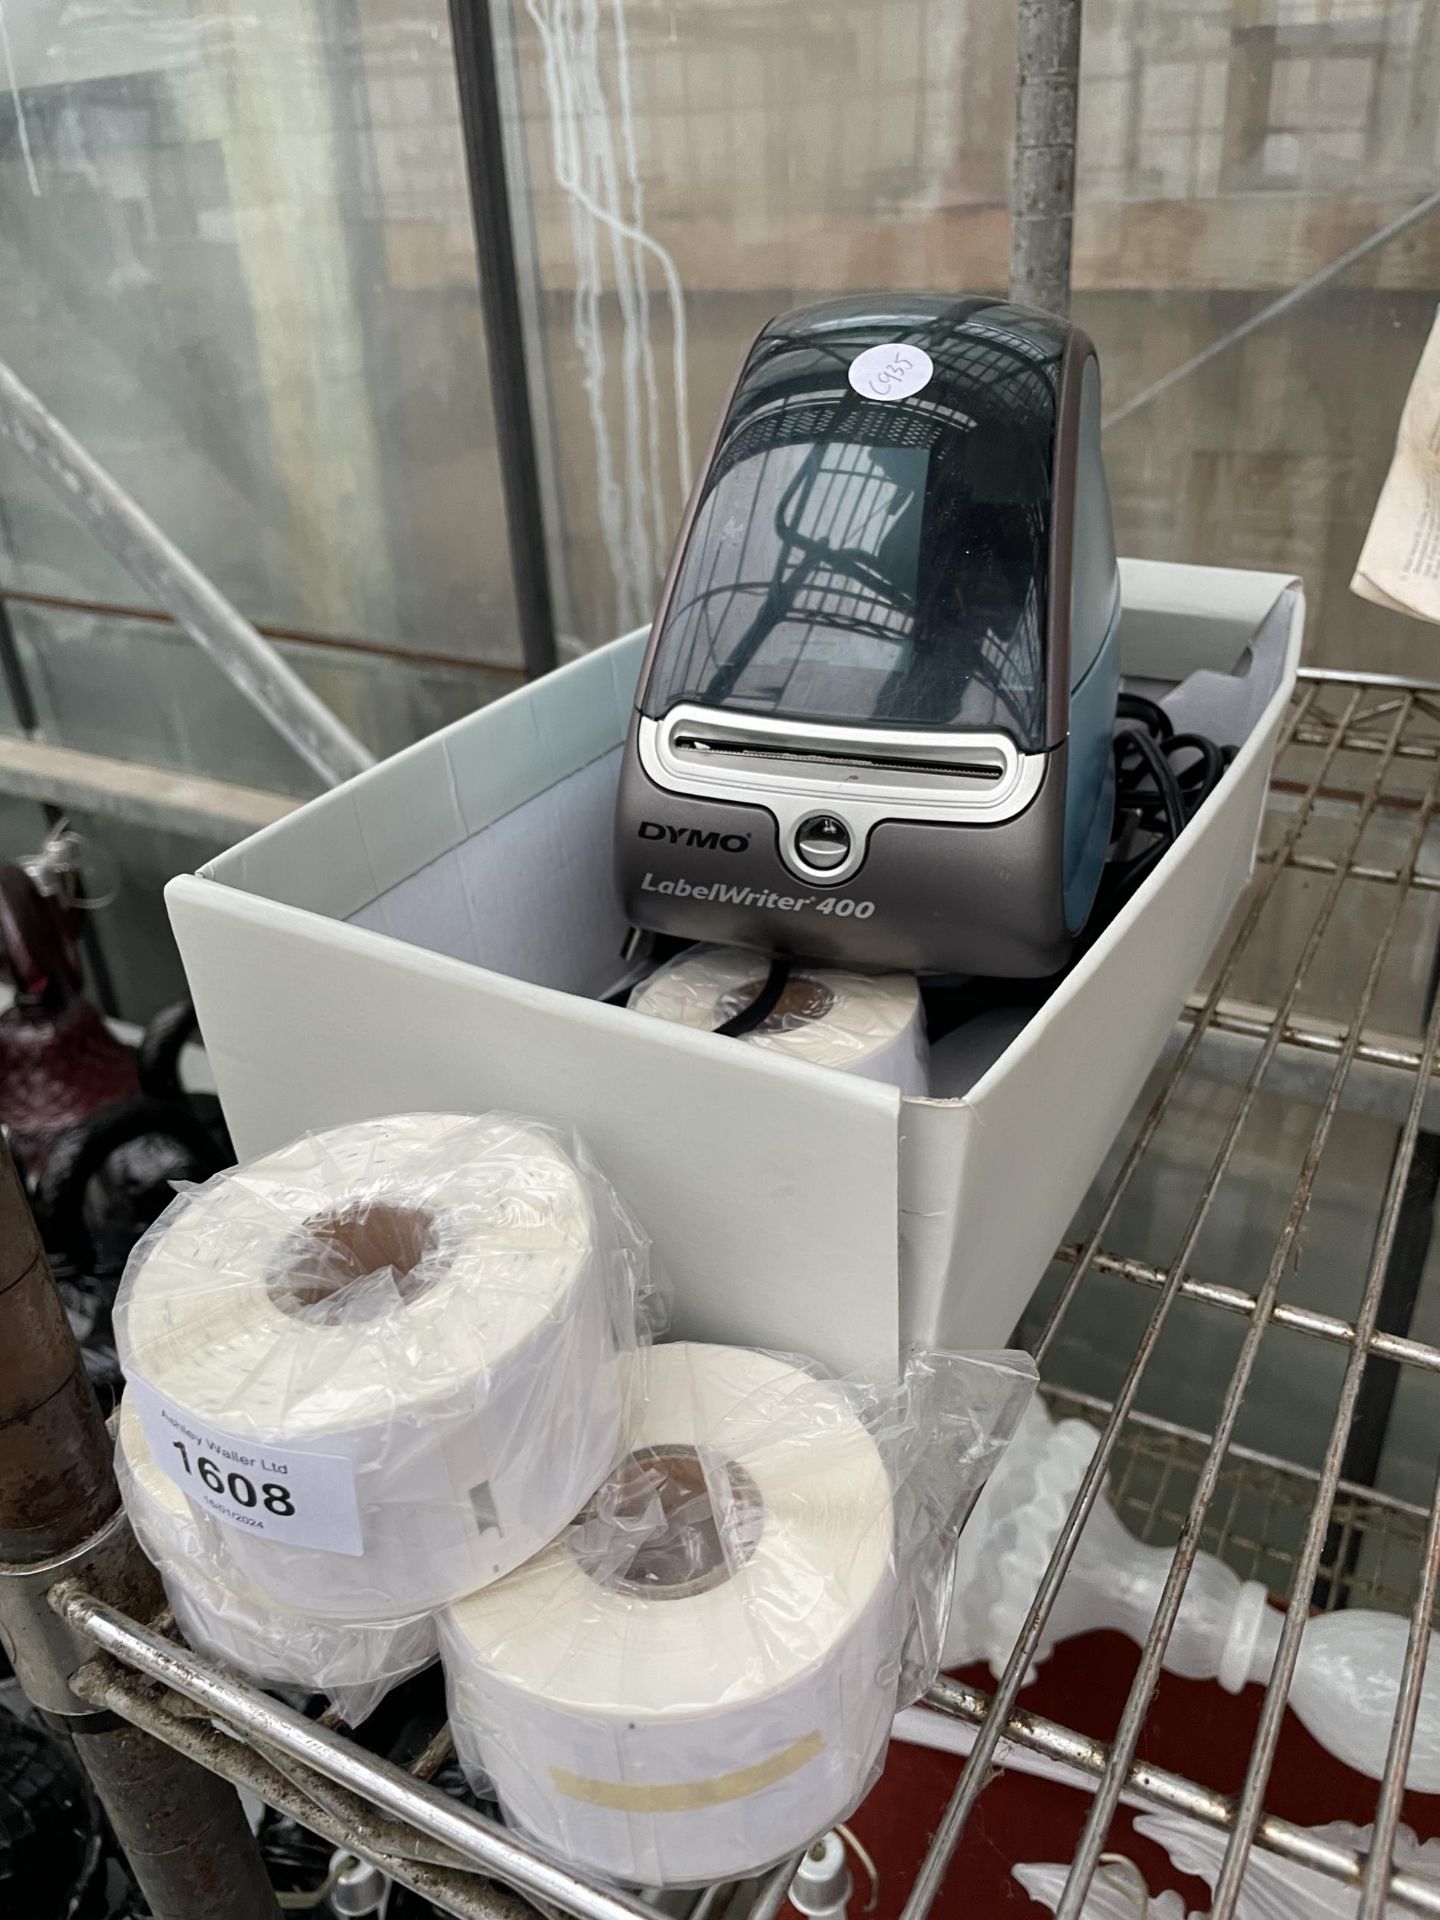 AN ELECTRIC DYMO LABALWRITER400 AND THREE NEW ROLLS OF LABELS